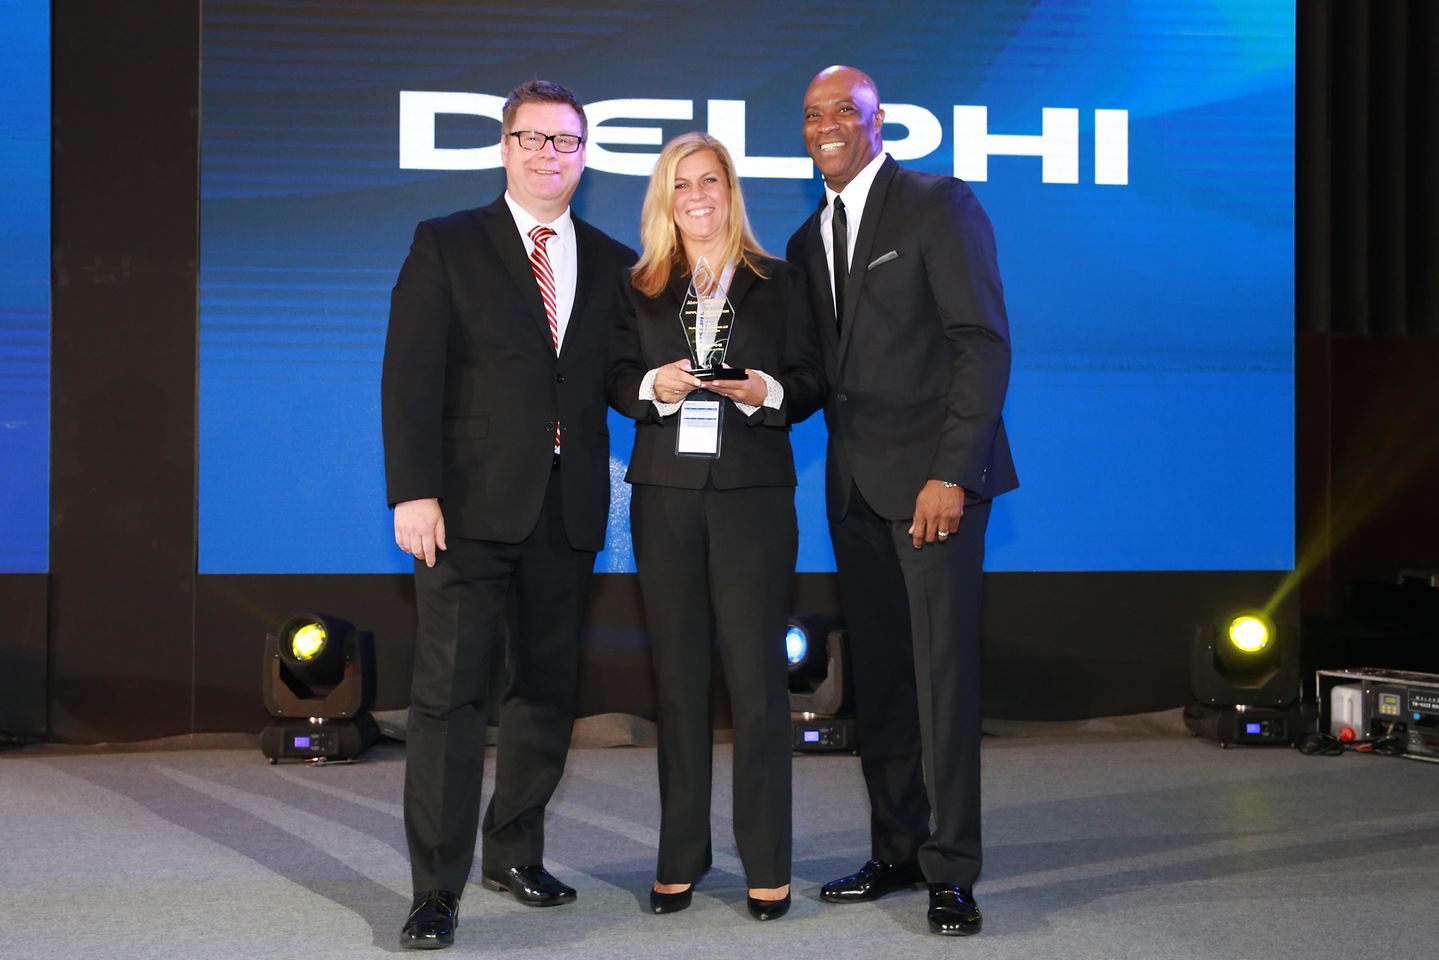 Henkel has received two 2014 Pinnacle Awards and one Above and Beyond Award from Delphi Automotive PLC